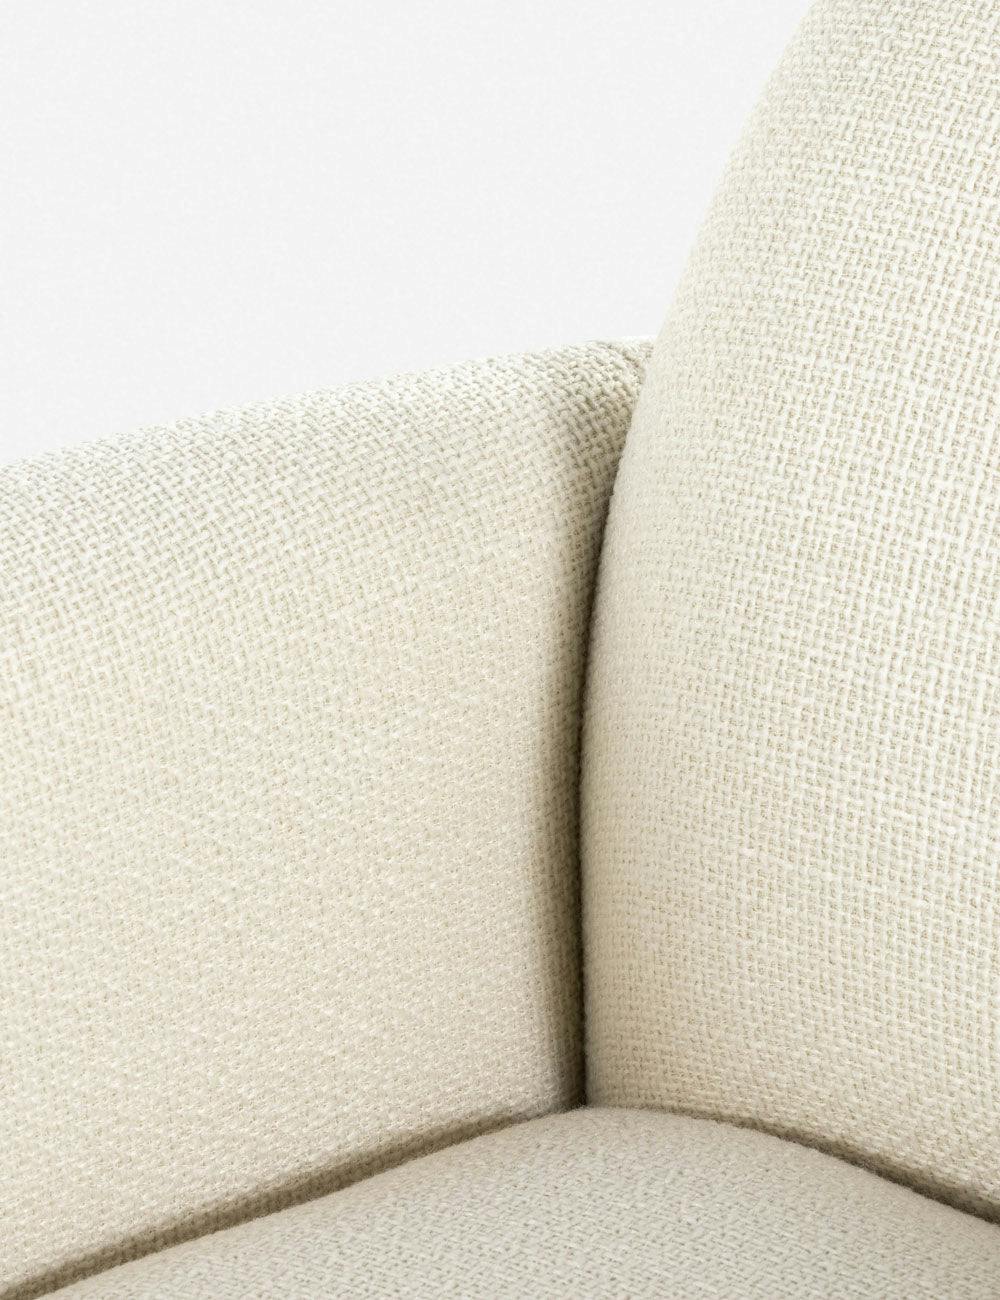 Gibson White Cream Swivel Accent Chair with Wood Base